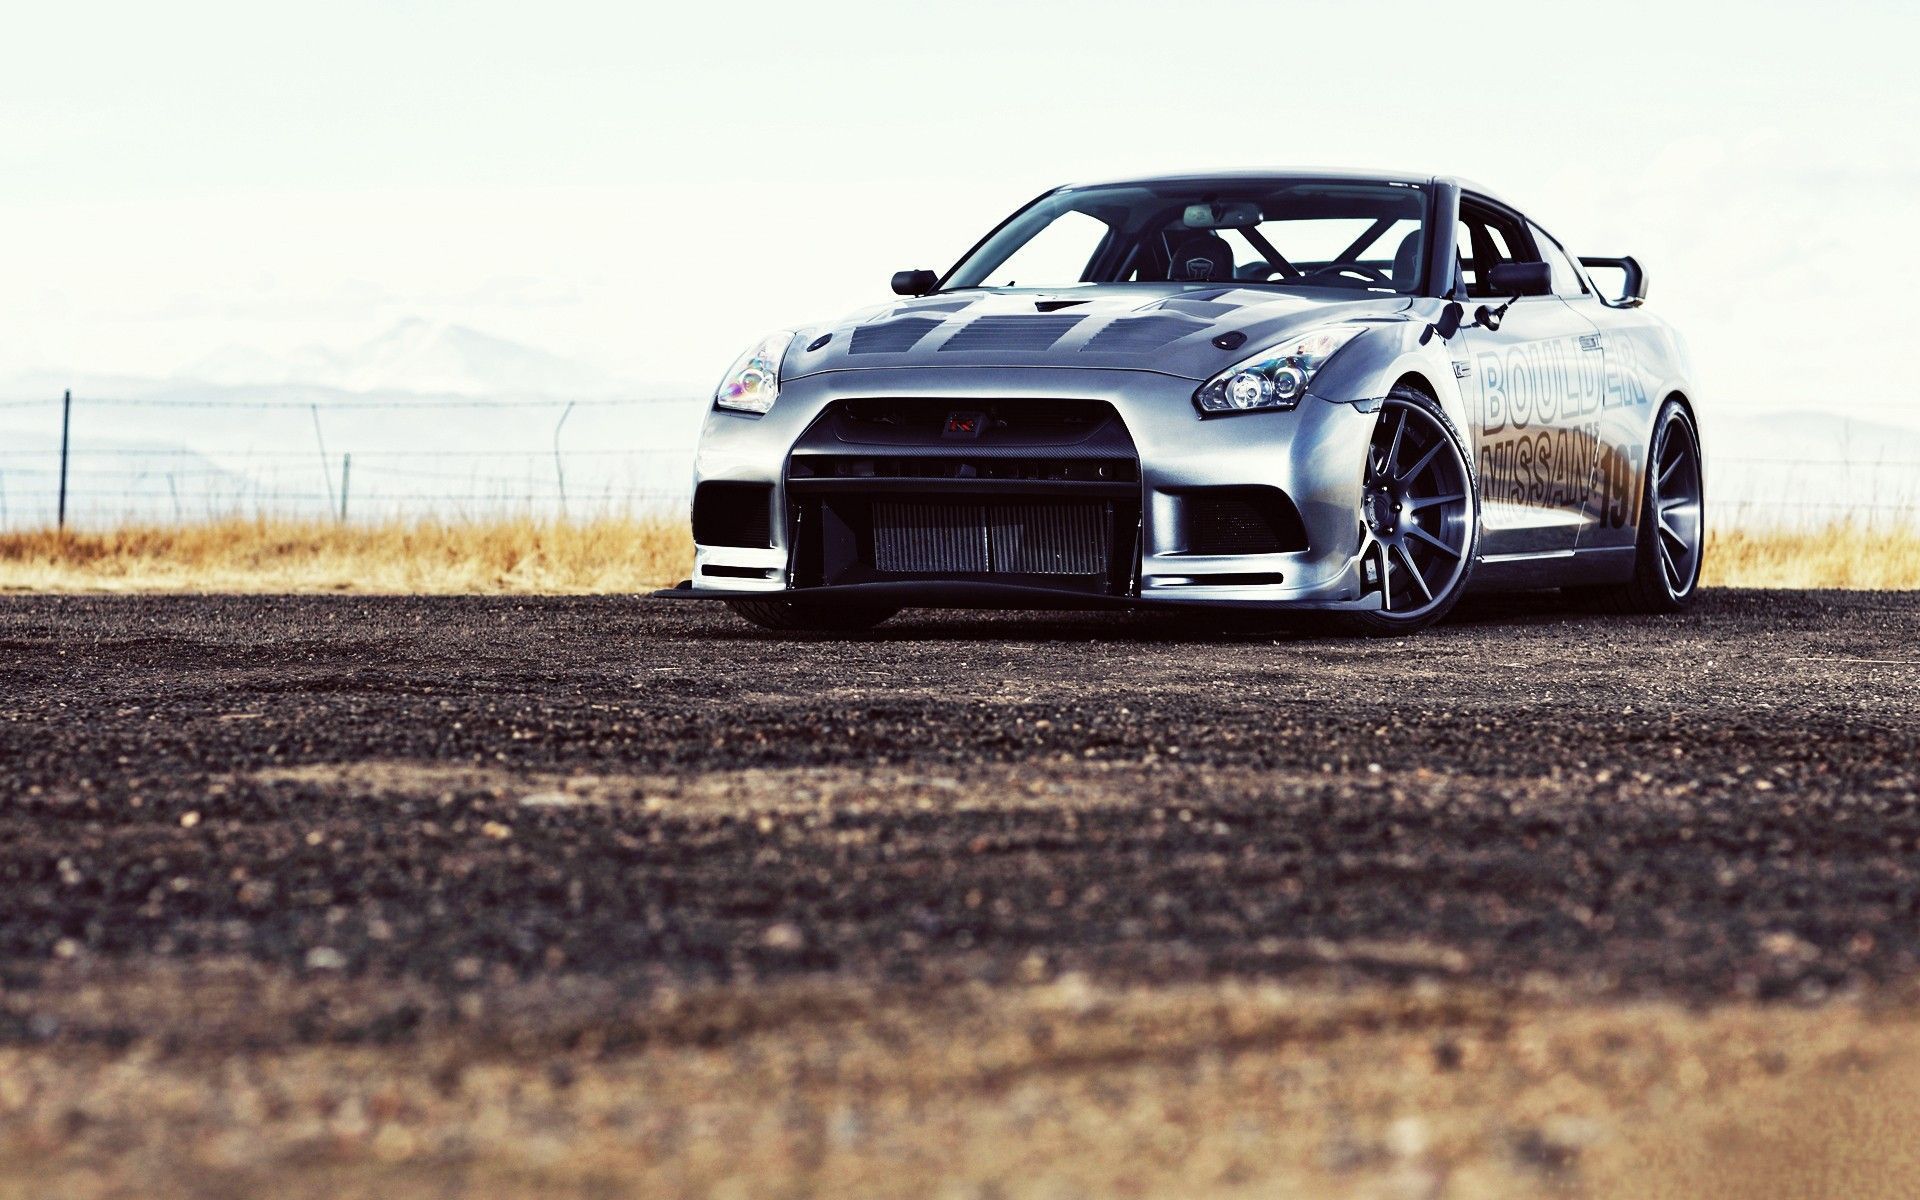 R35 wallpapers WallpaperUP